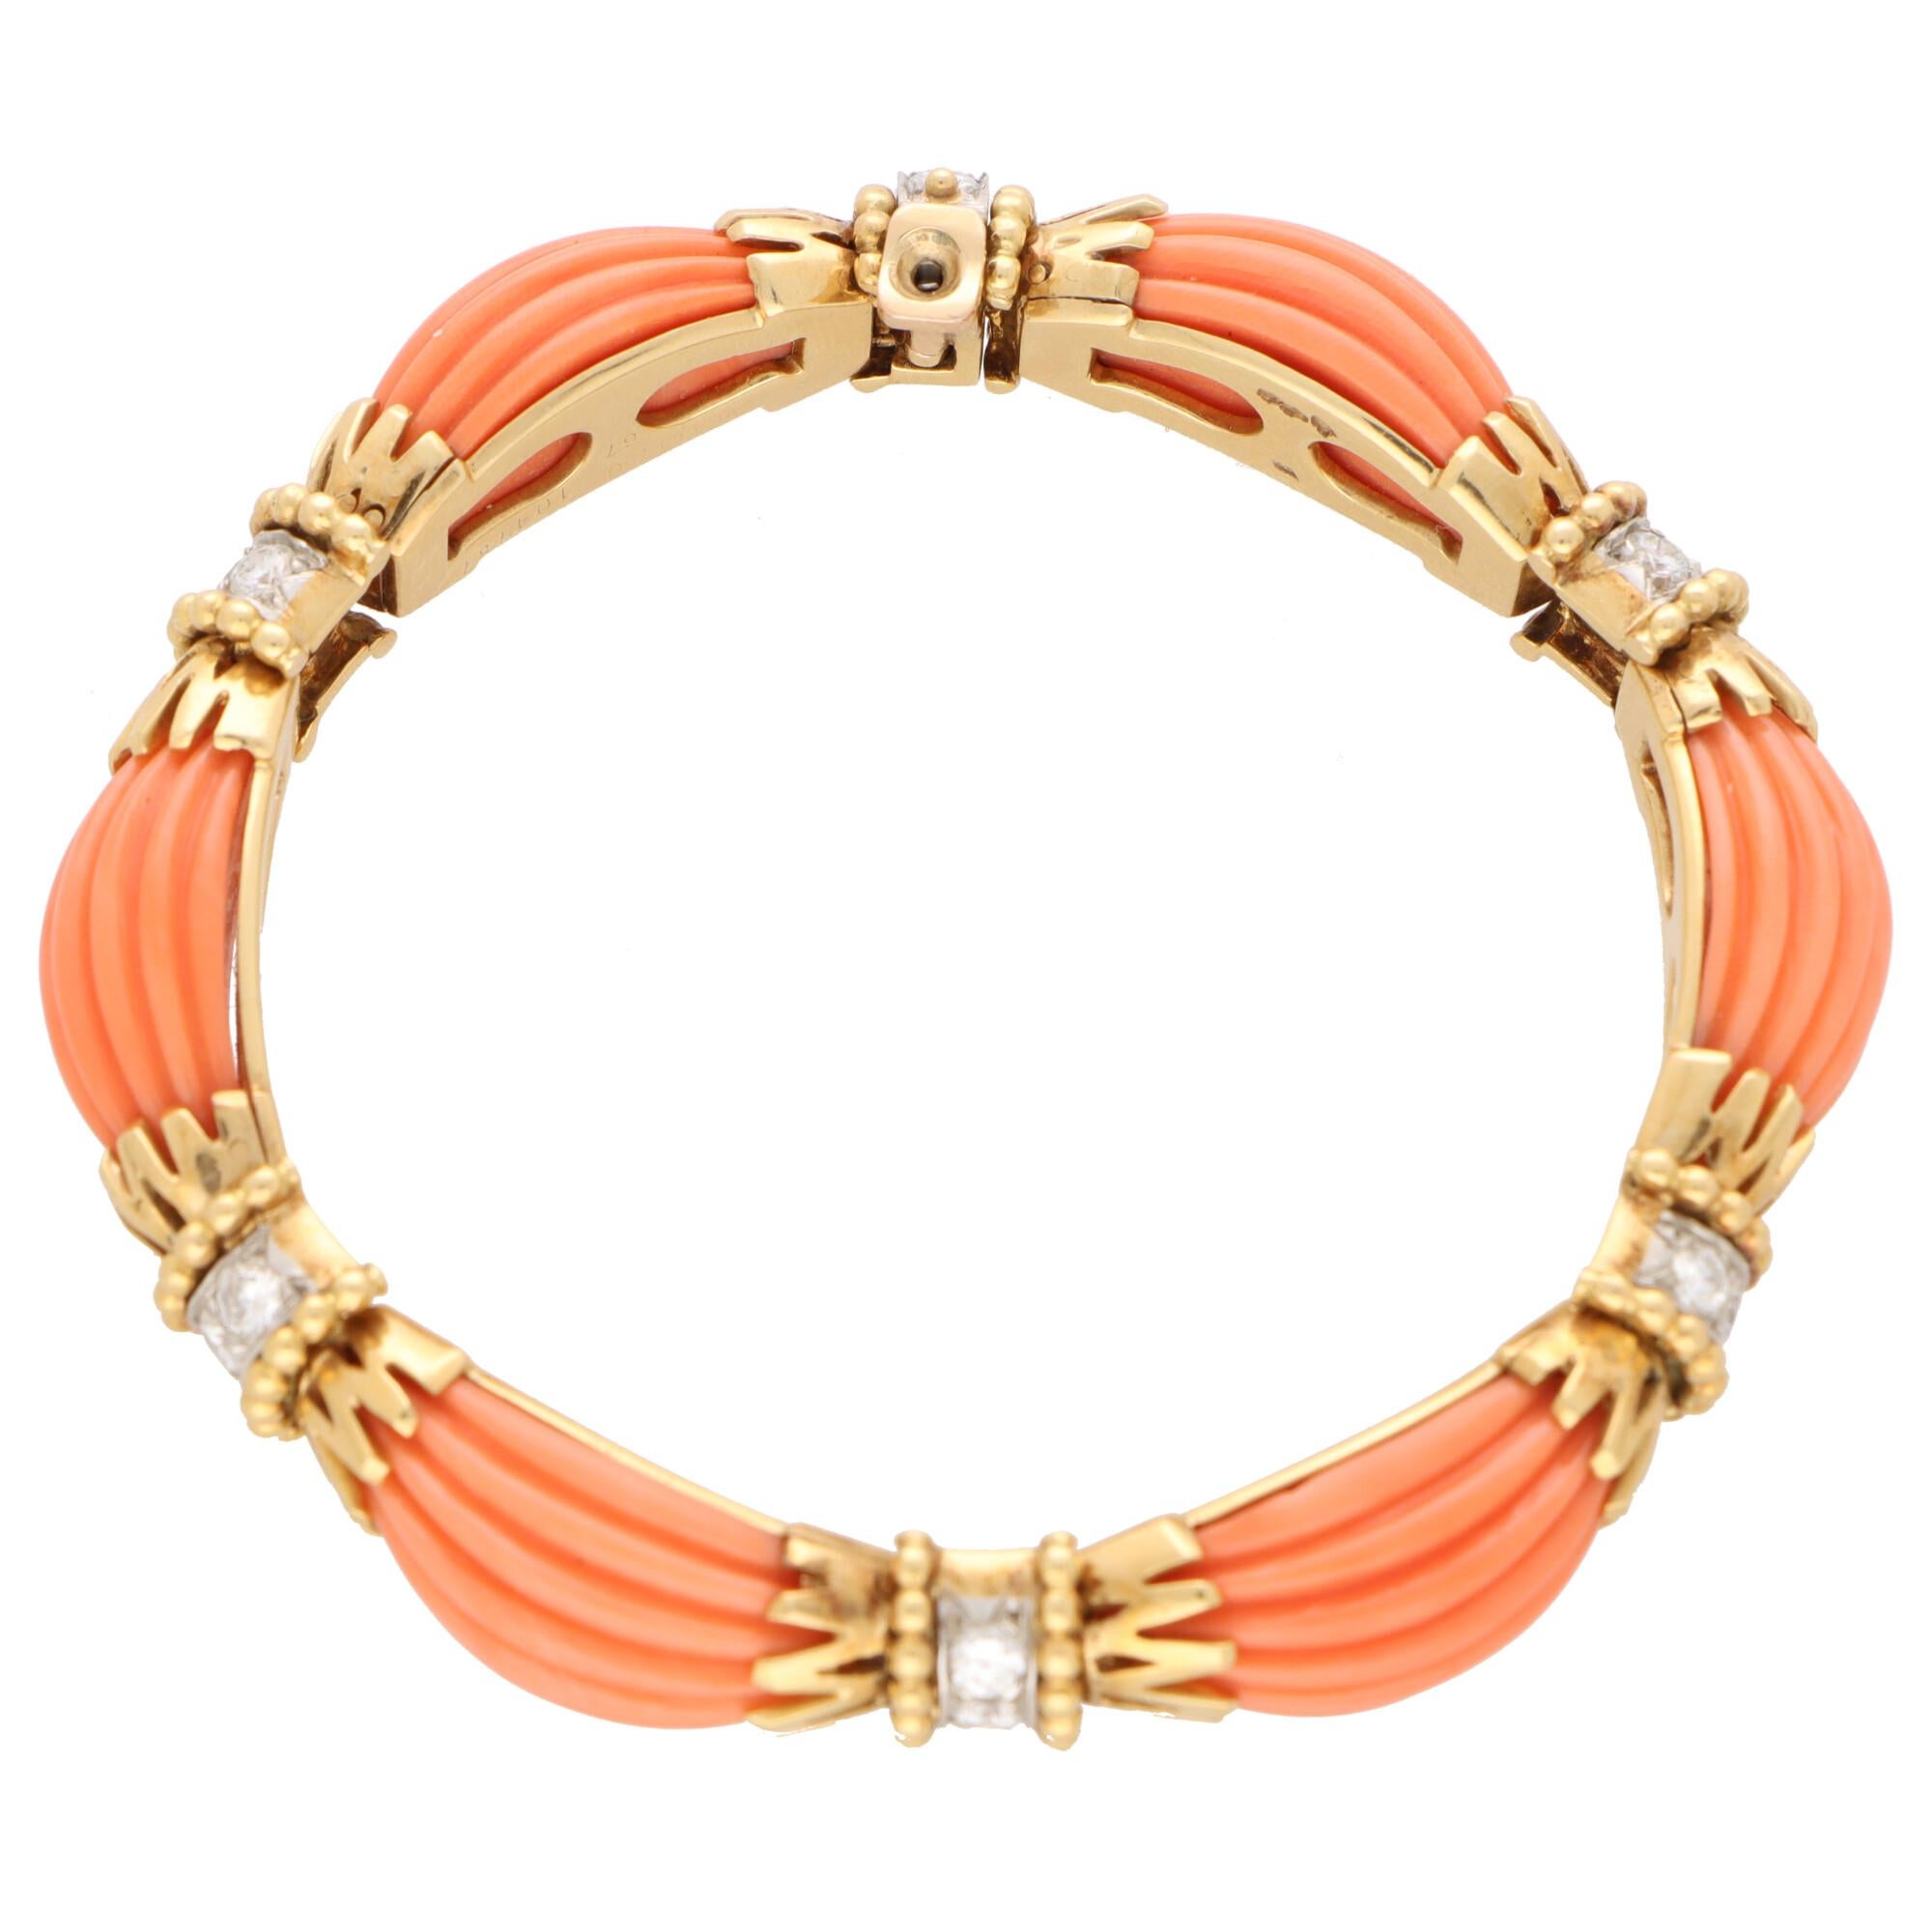 - May require a CITES upon importation. Please inquire to 1st dibs -

A beautiful vintage Van Cleef & Arpels coral and diamond bracelet set in 18k yellow gold and platinum.

The bracelet is designed as a continuous row of fluted oval coral cabochon